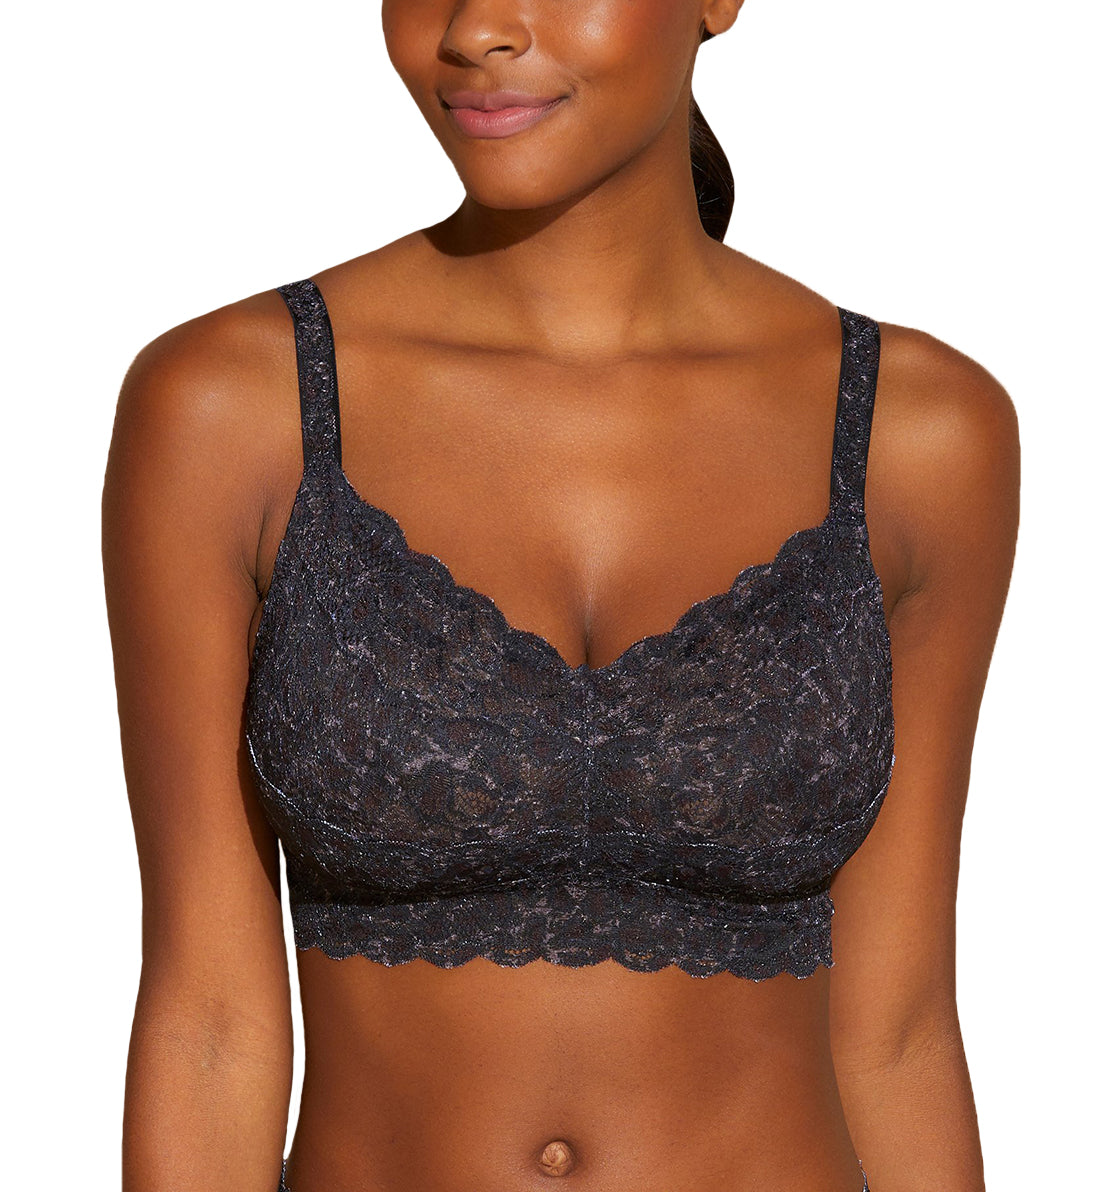 Cosabella Never Say Never Printed CURVY Sweetie Bralette (NEVEP1310),XS,Black Panther - Black Panther,XS